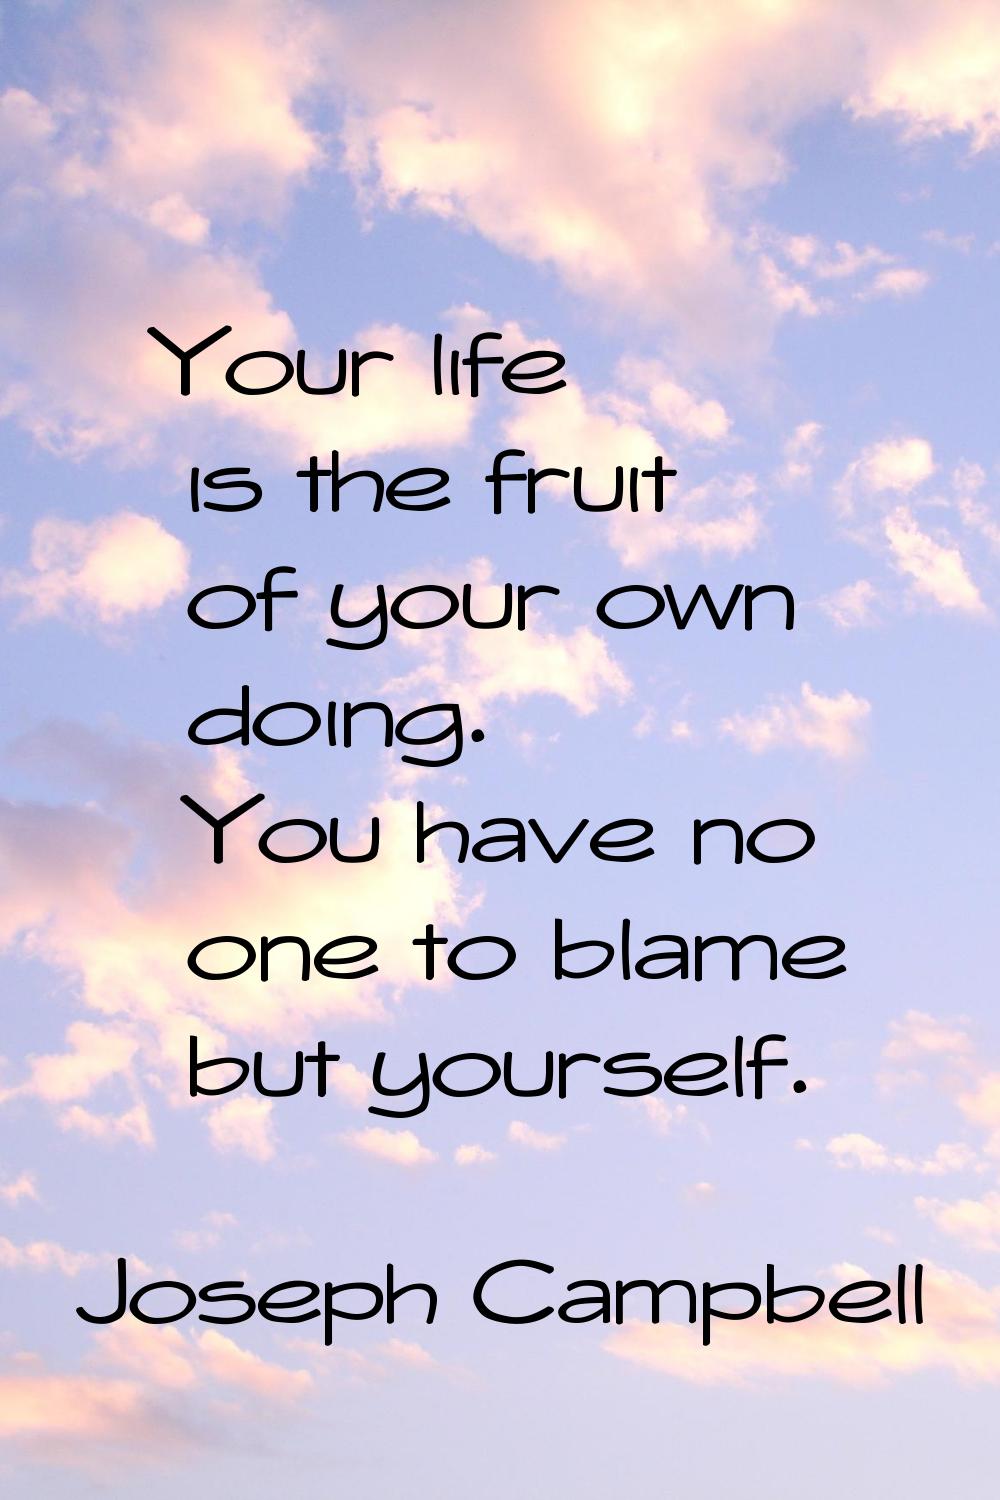 Your life is the fruit of your own doing. You have no one to blame but yourself.